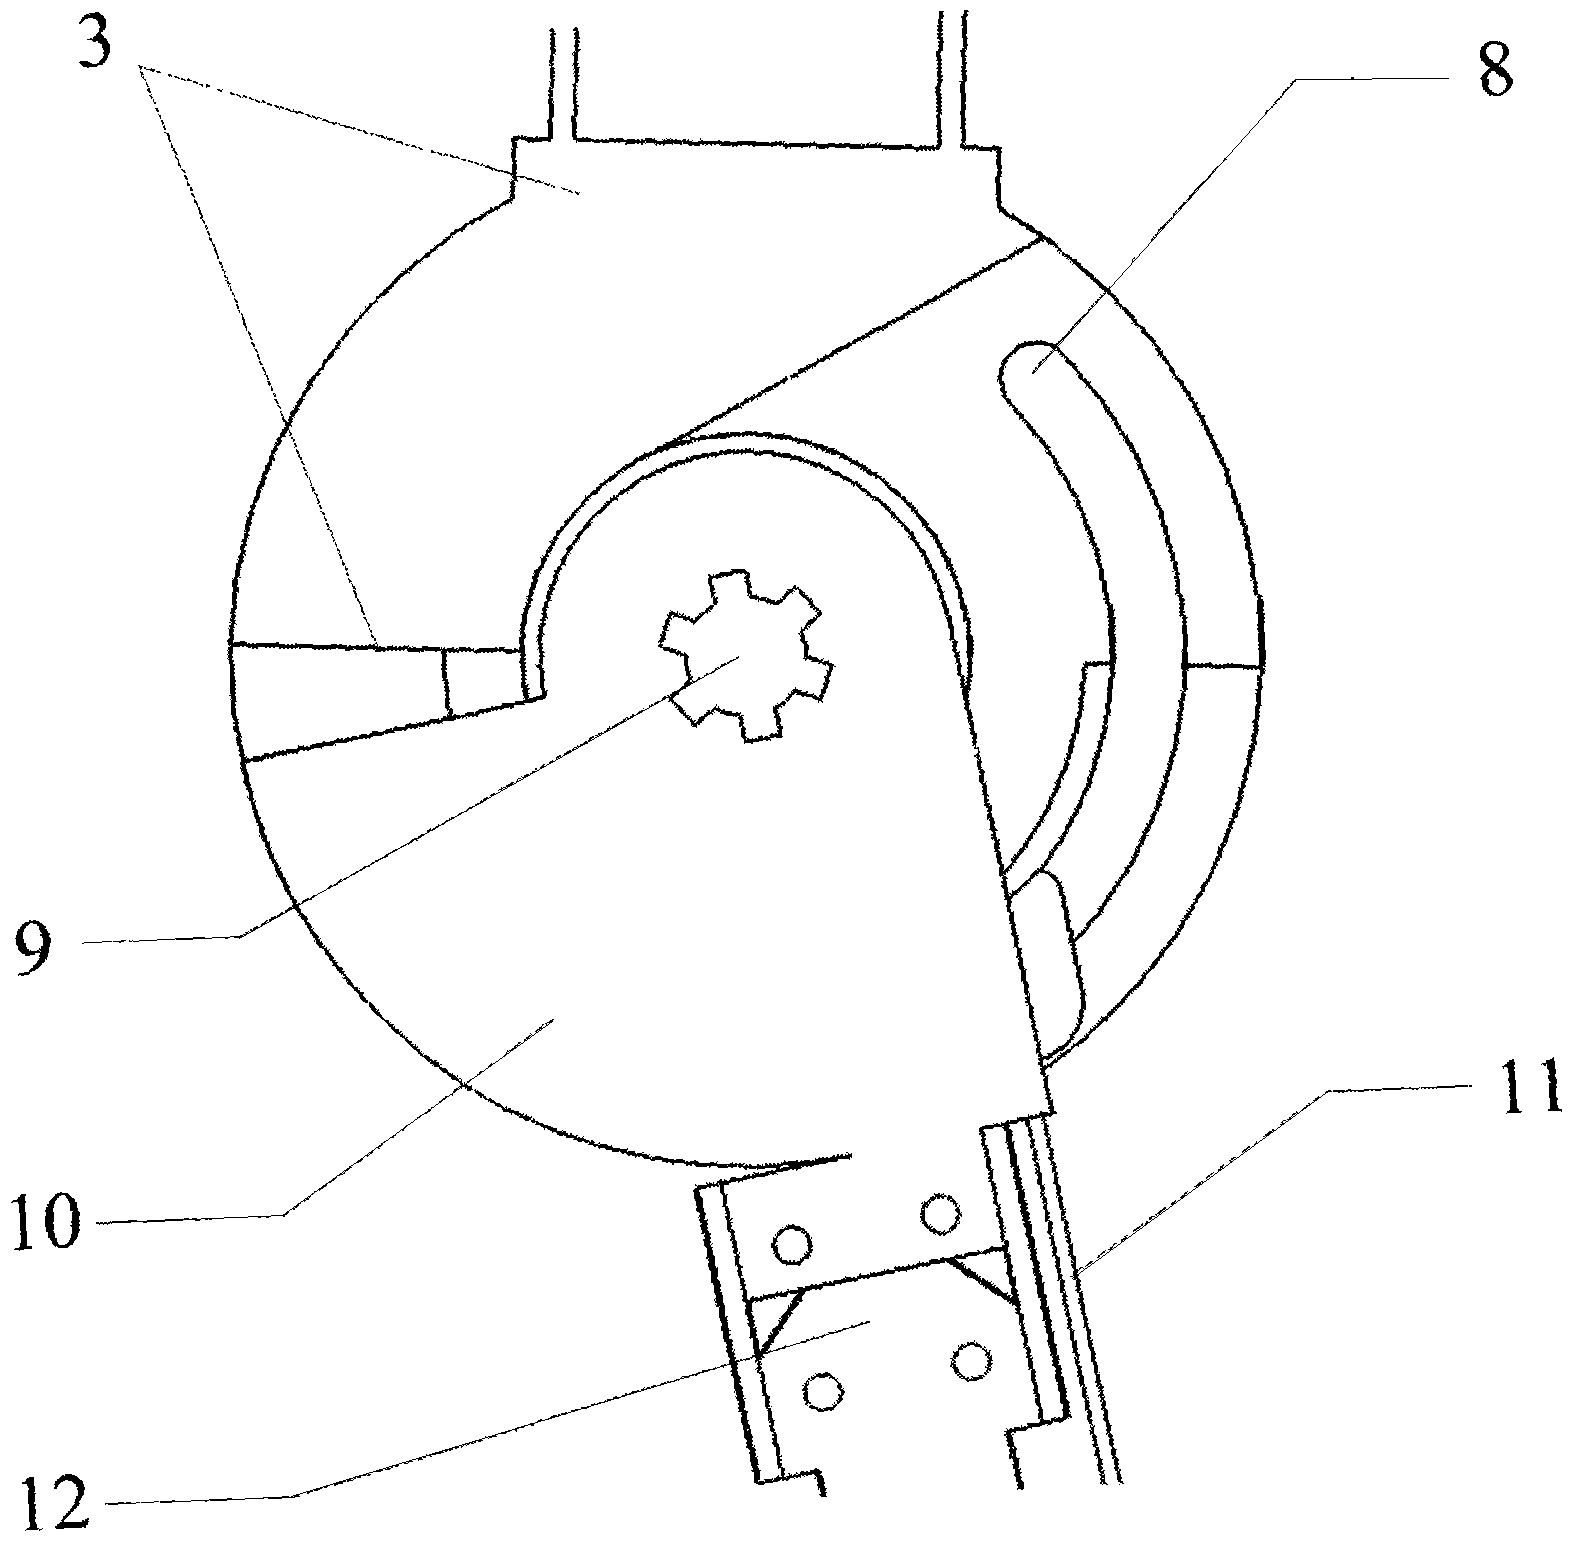 Active knee joint structure with function of load-bearing and self-locking